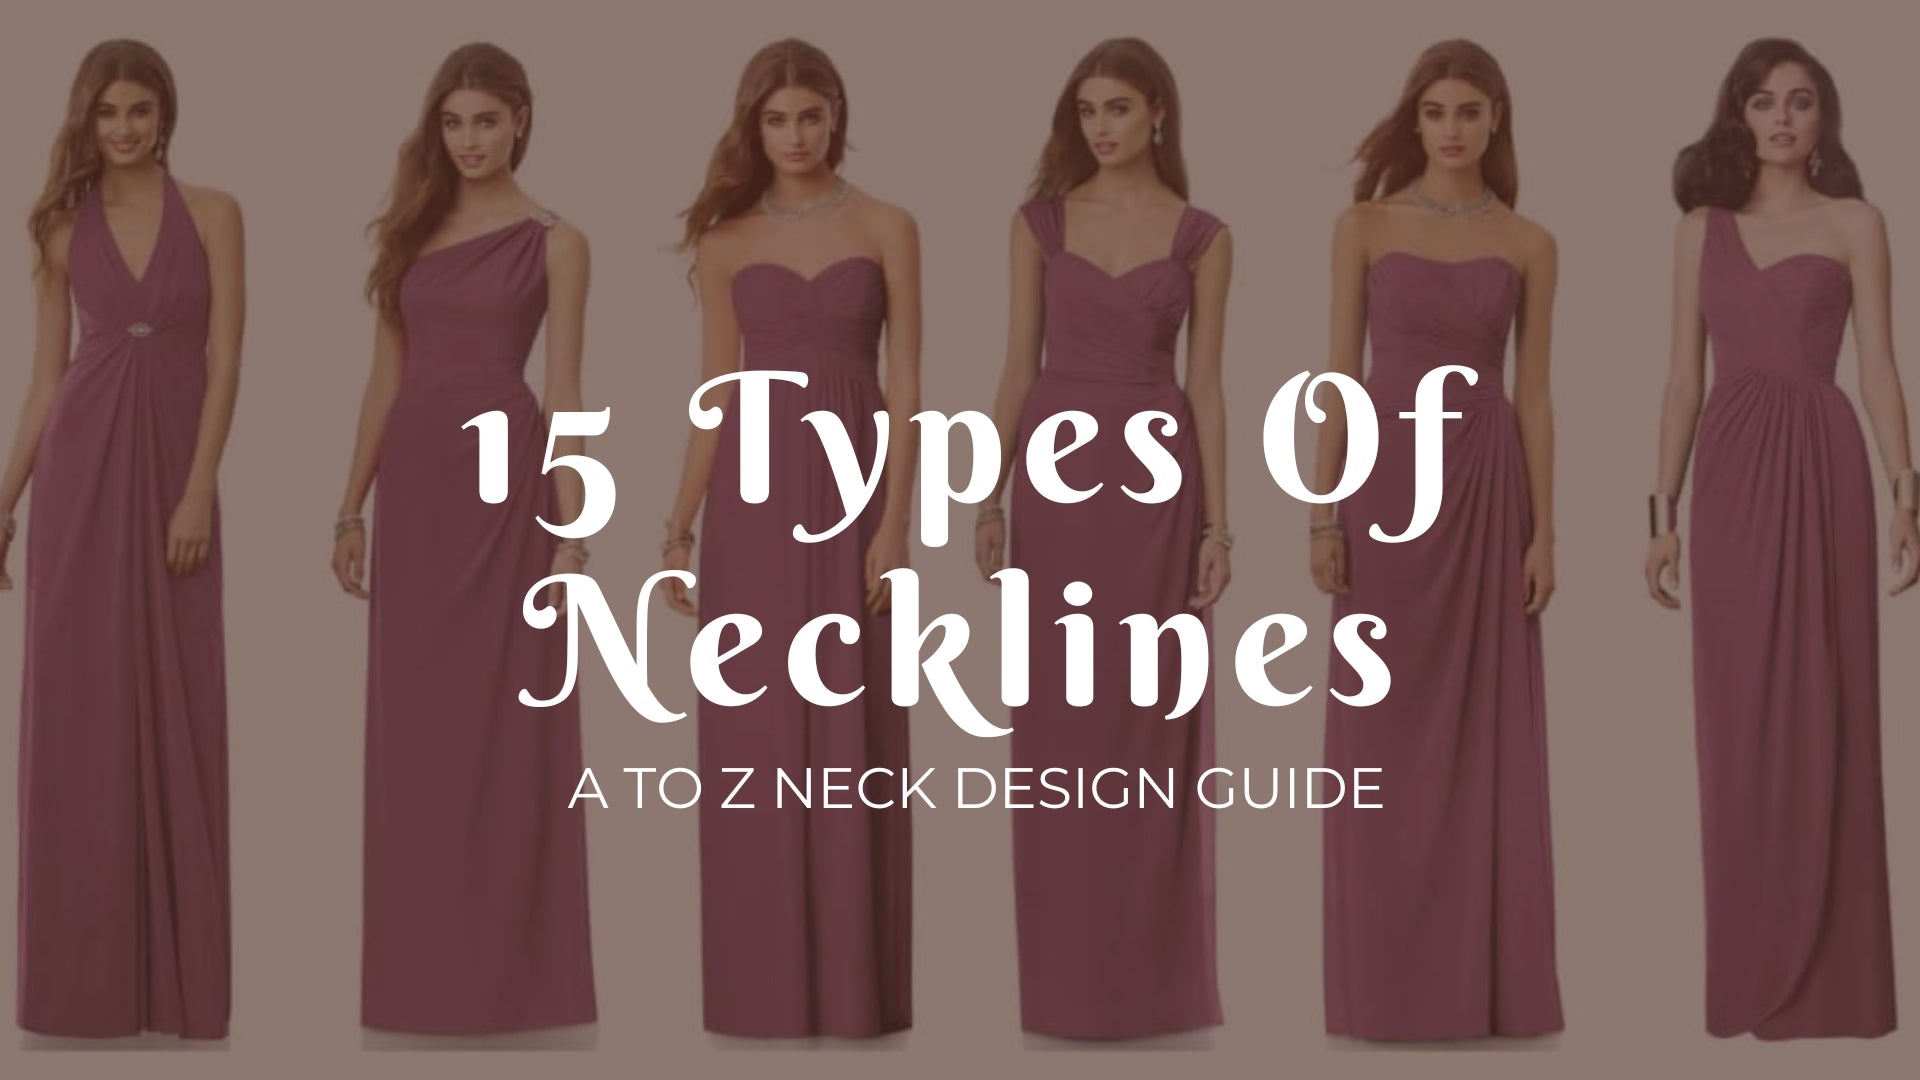 15 Types Of Necklines You Need To Know: A To Z Neck Design Guide 